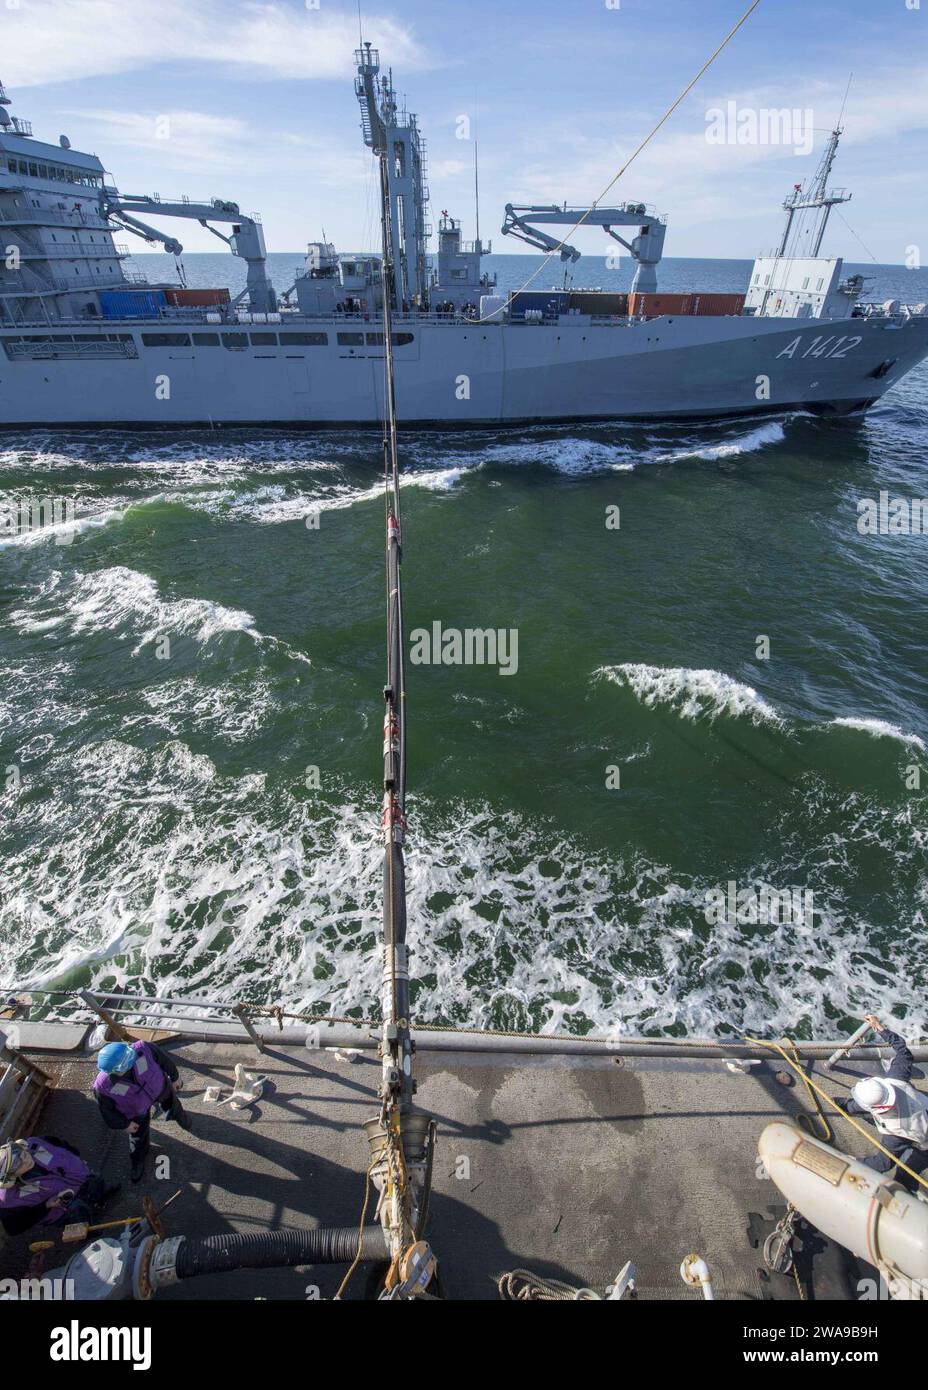 US military forces. 180609PC620-0083 BALTIC SEA (June 9, 2018) The Harpers Ferry-class dock landing ship USS Oak Hill (LSD 51) conducts a replenishment-at-sea with the type 702 Berlin-class replenishment ship FGS Frankfurt A.M. (A1412) during exercise Baltic Operations (BALTOPS) 2018, June 9. BALTOPS is the premier annual maritime-focused exercise in the Baltic region and one of the largest exercises in Northern Europe enhancing flexibility and interoperability among allied and partner nations. (U.S. Navy photo by Mass Communication Specialist 3rd Class Michael H. Lehman/Released) Stock Photo